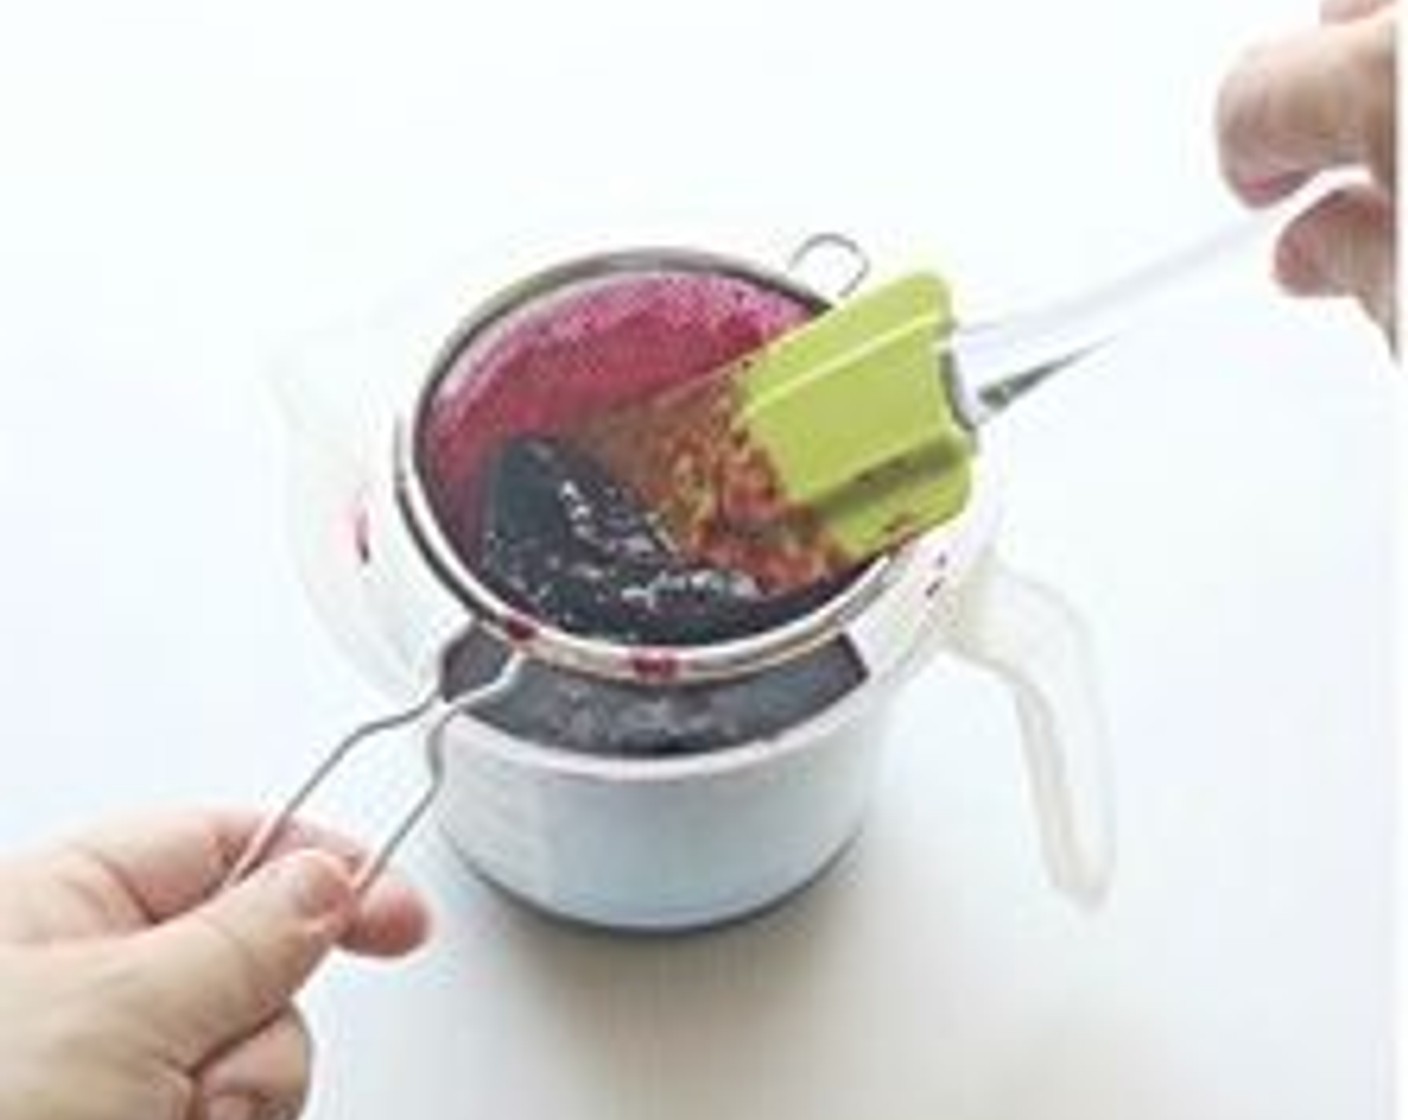 step 12 Mash blueberries with a spatula or spoon. Then press blueberries through a strainer to extract as much liquid as possible. Blueberries liquid should be measure to around 120 gram after strained.